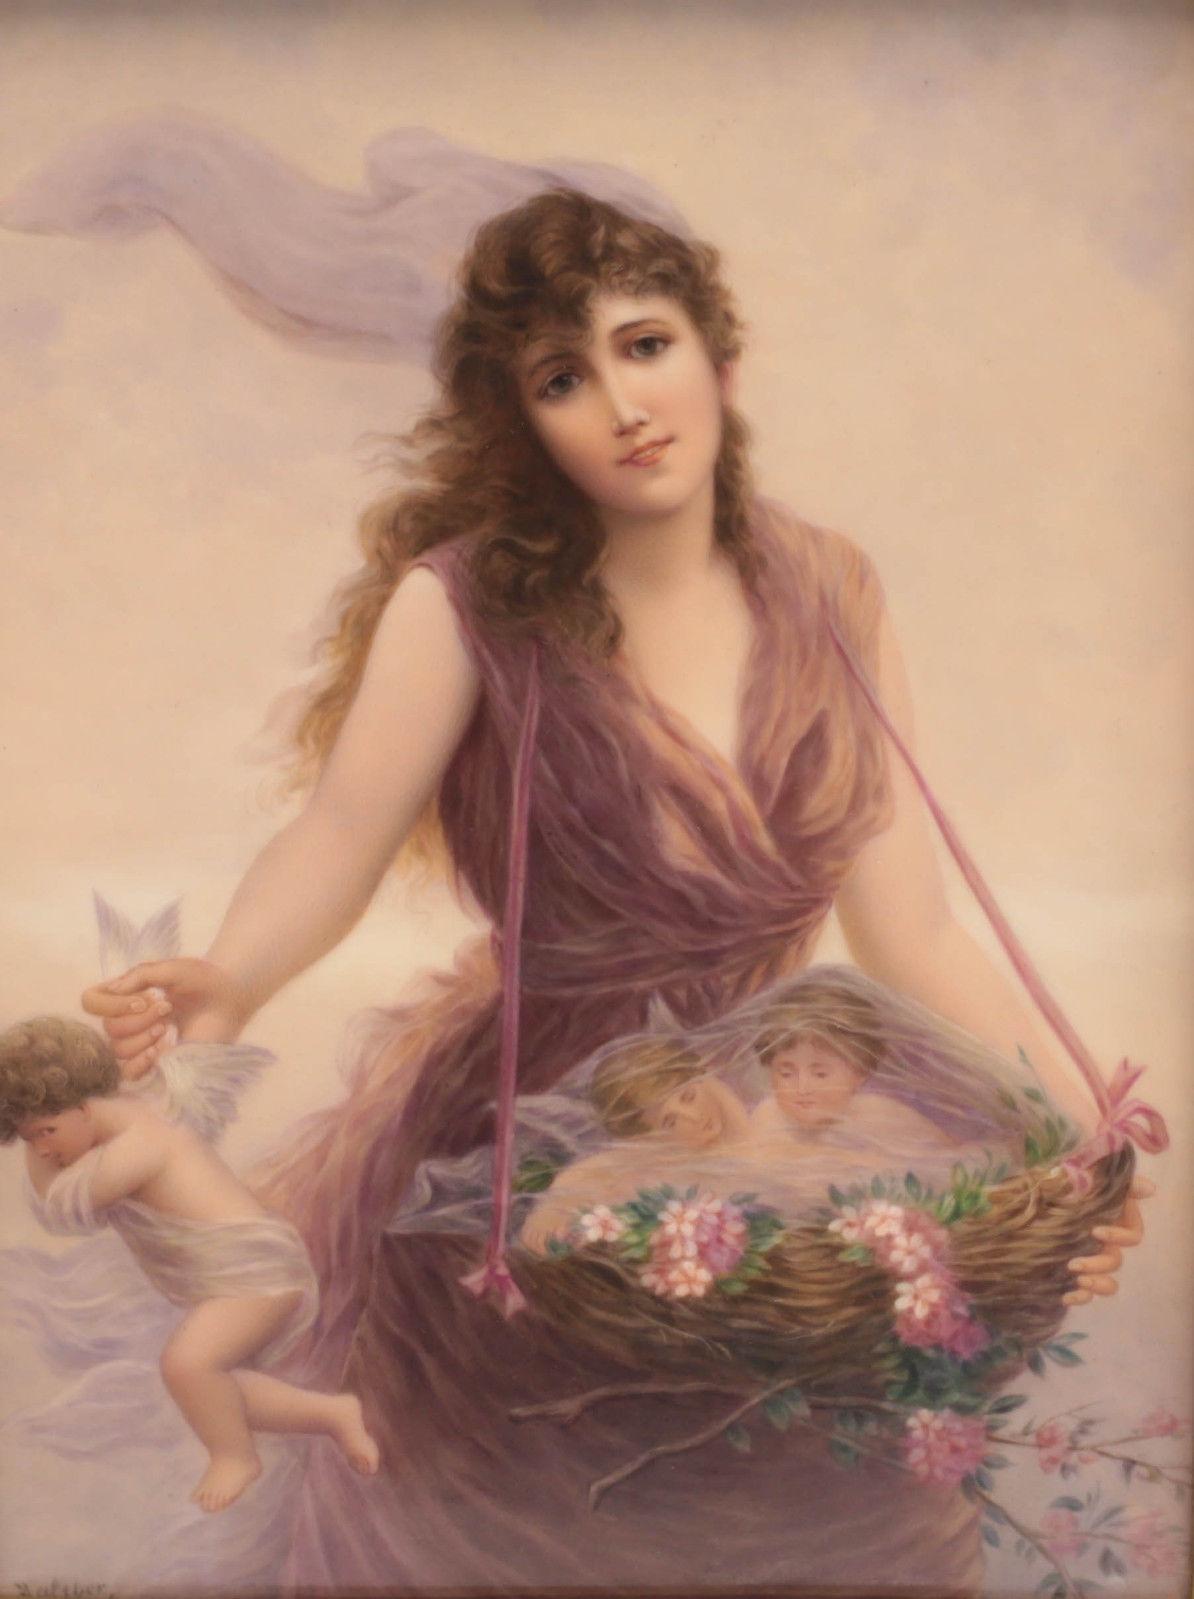 A very fine KPM hand painted porcelain plaque of a beauty and cherubs, circa 1890. The porcelain plaque depicts an ethereal brunette beauty collecting cherubs with her straw nest basket. Signed 